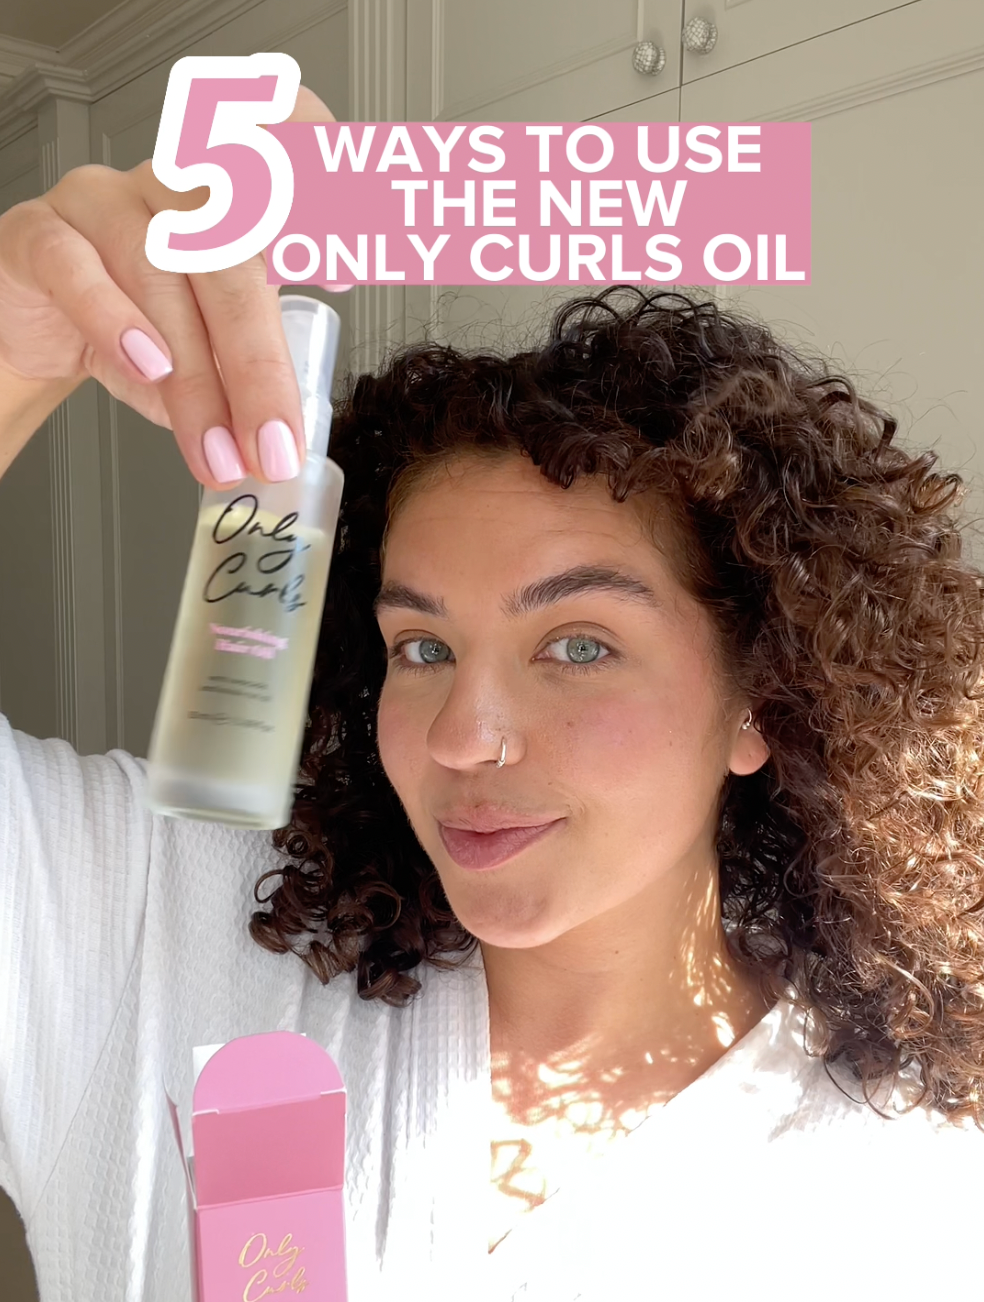 Using A Hair Oil On Curly Hair - The Ultimate Guide